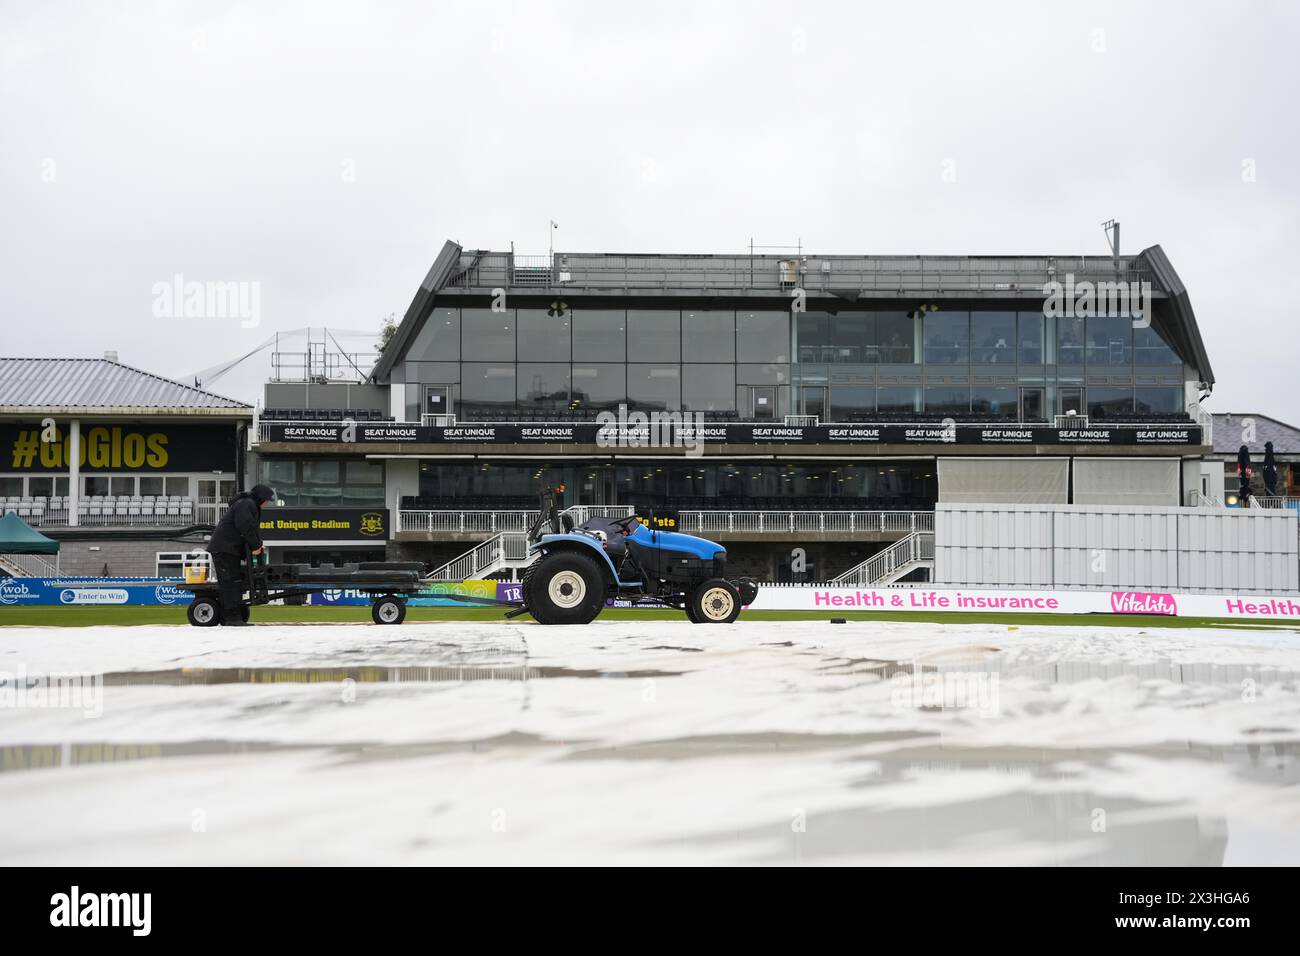 Bristol, UK, 27 April 2024. A general view of the Seat Unique Stadium as rain delays play on day two during the Vitality County Championship Division Two match between Gloucestershire and Middlesex. Credit: Robbie Stephenson/Gloucestershire Cricket/Alamy Live News Stock Photo